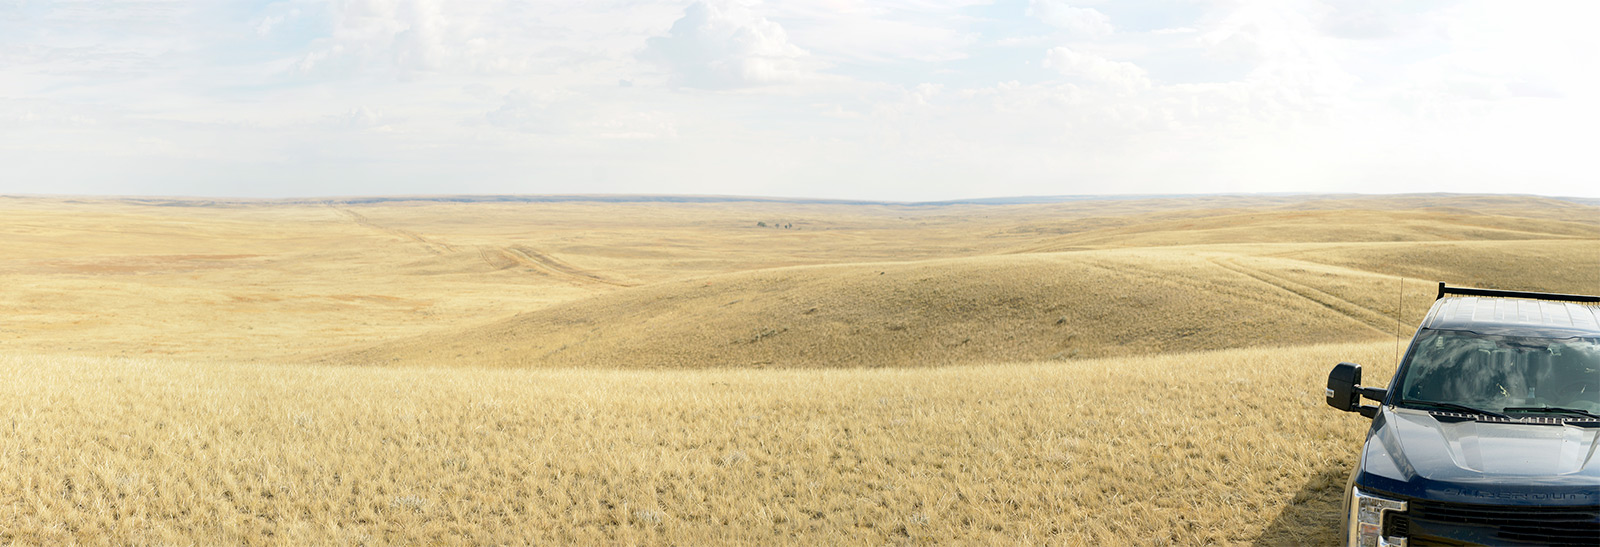 Panoramic photo of a rolling landscape with yellow fields under a blue sky. A truck is parked on the far right